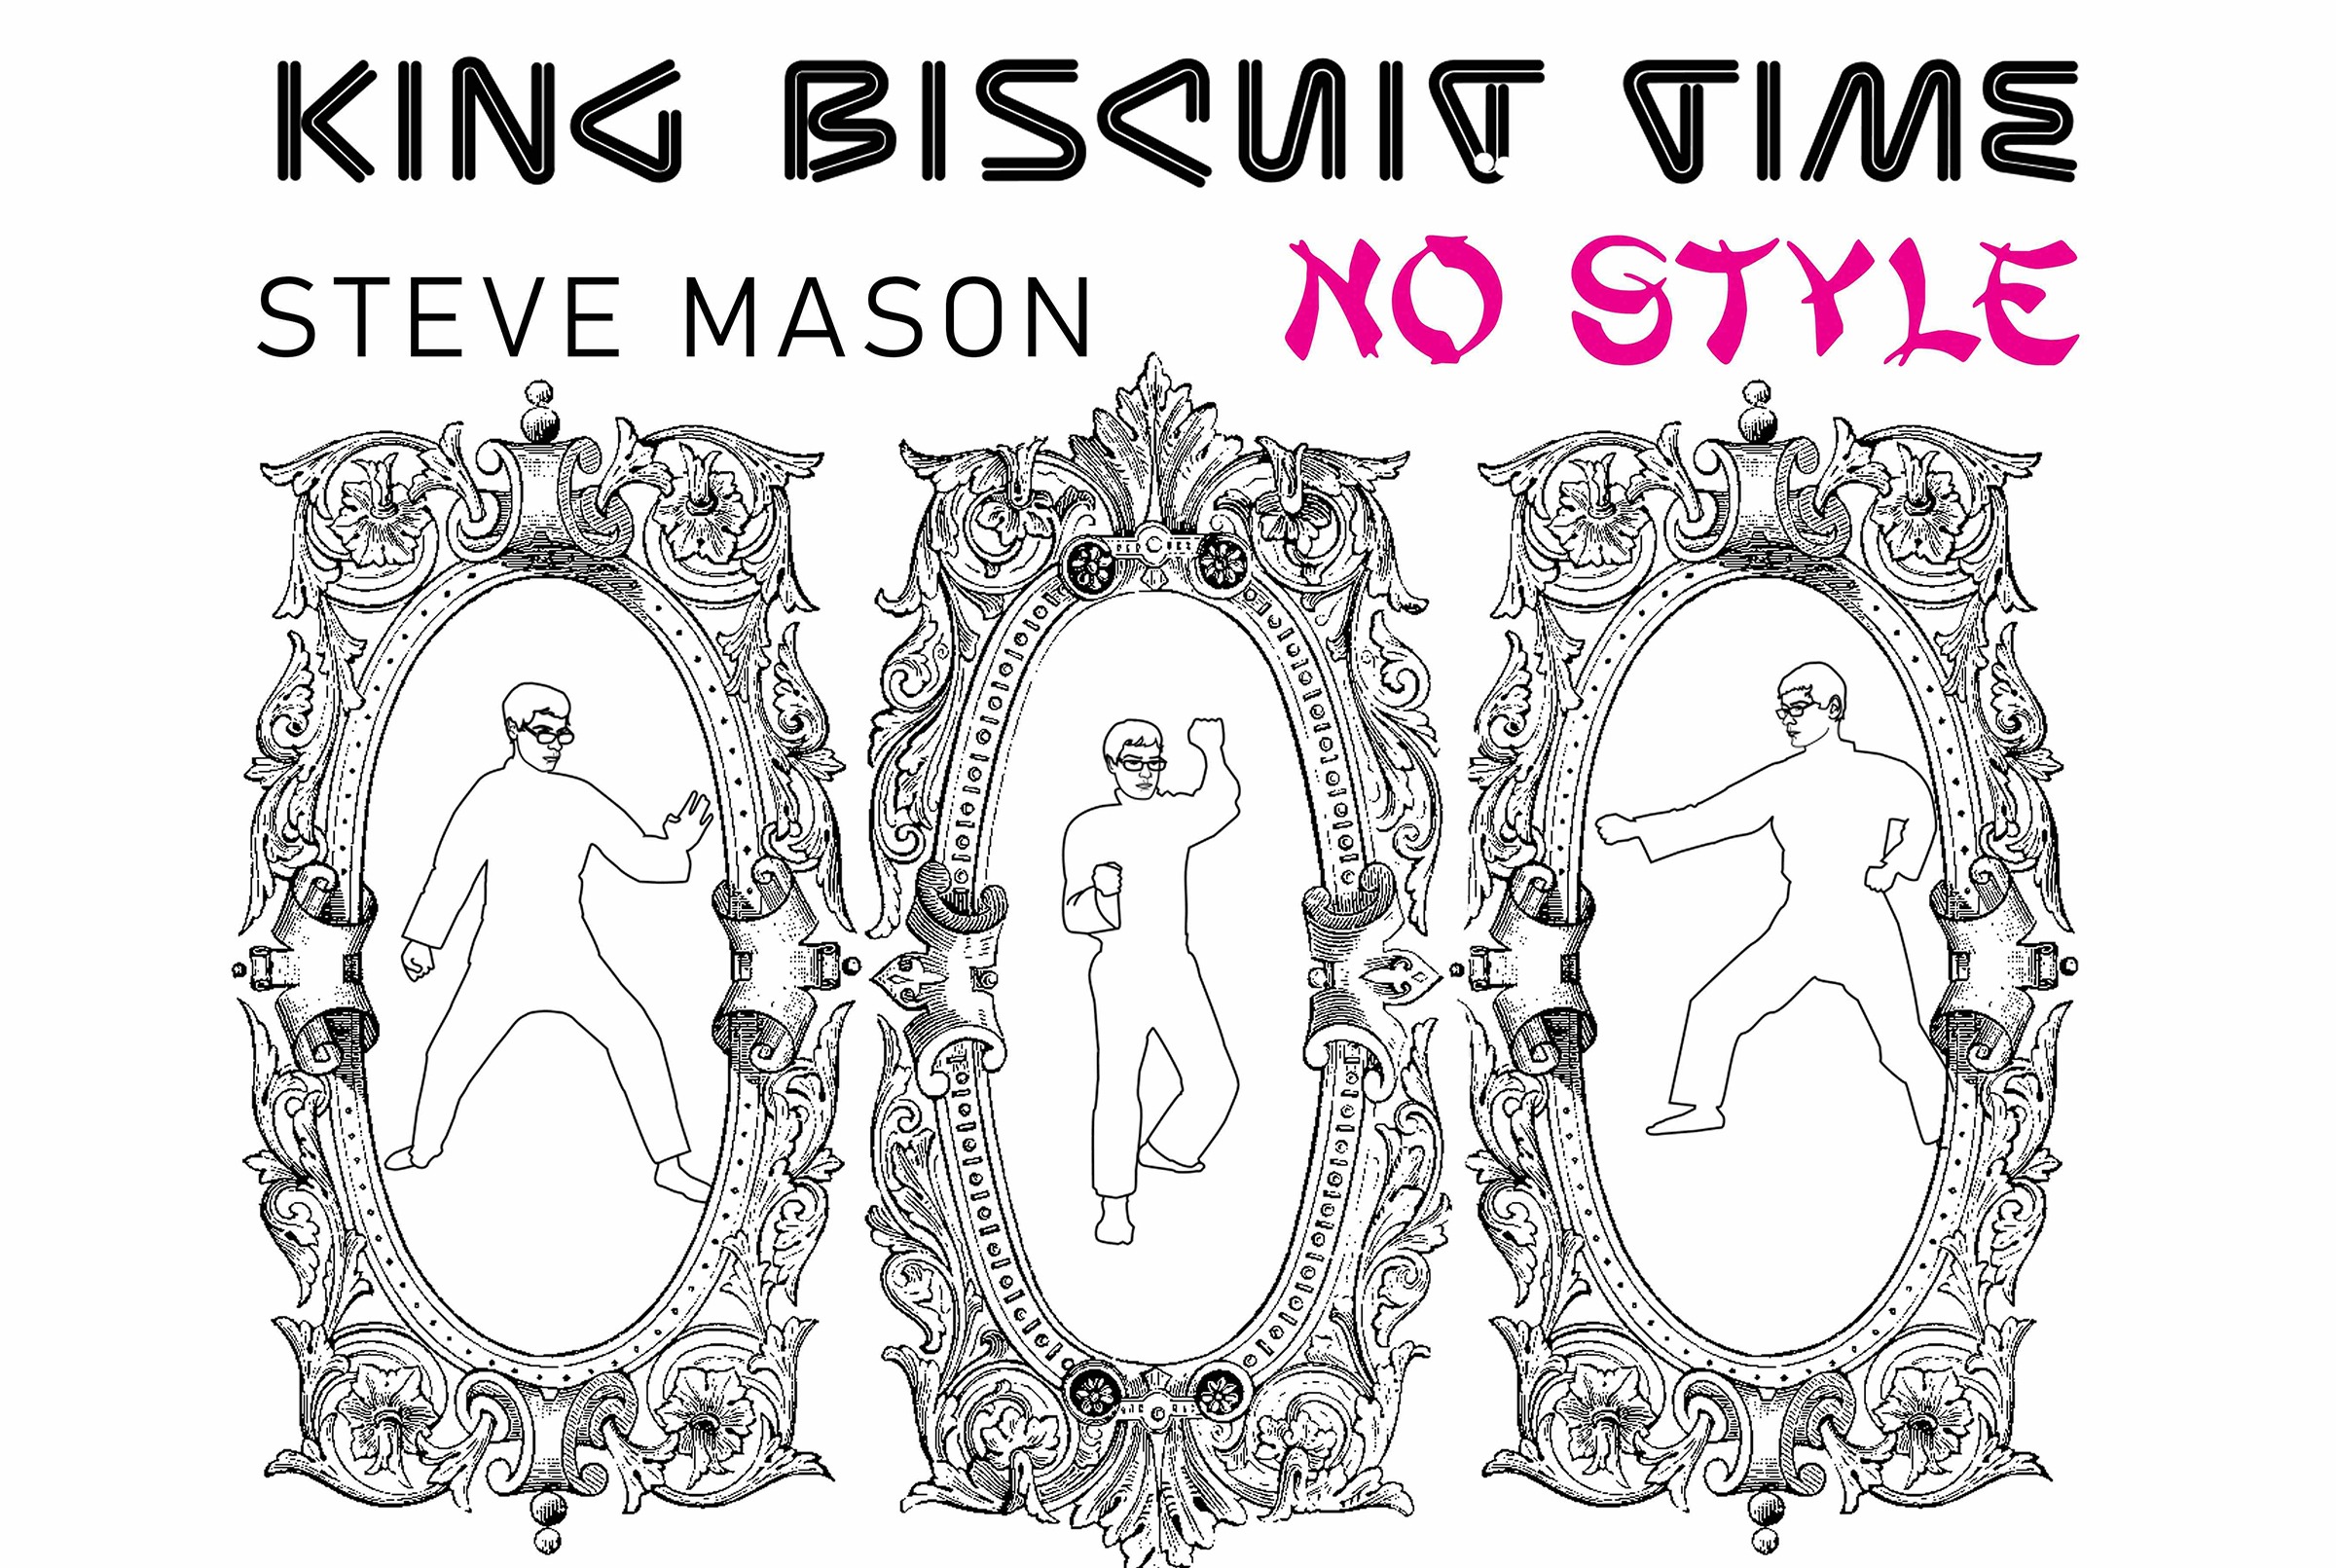 STEVE MASON to play King Biscuit Time album ‘Black Gold’ in its entirety on extensive UK tour 